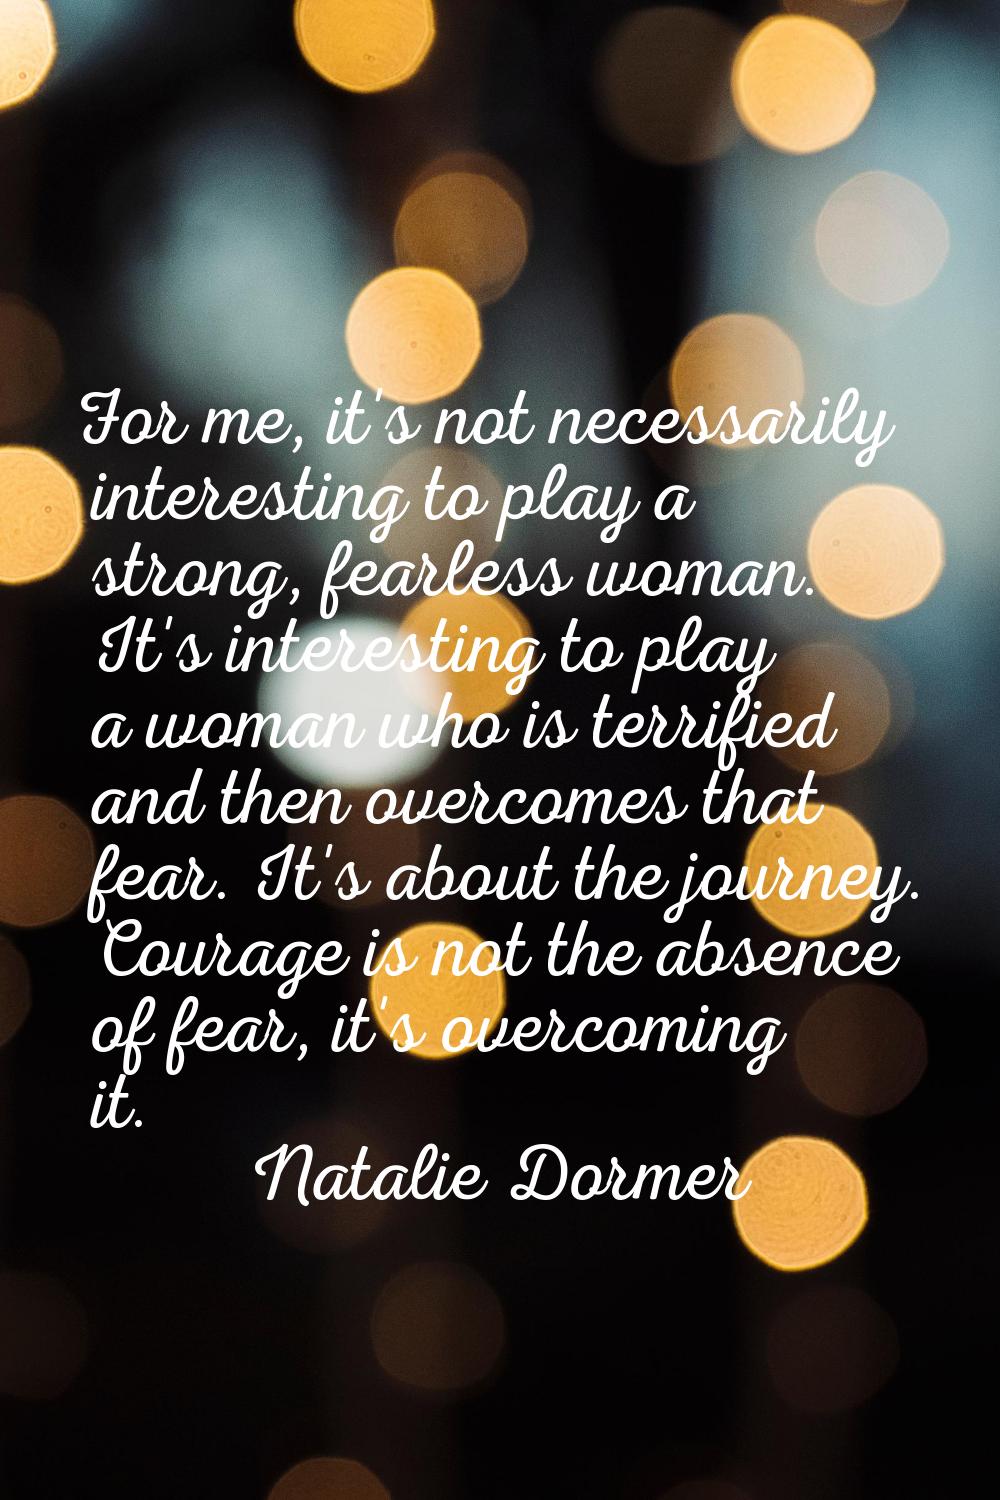 For me, it's not necessarily interesting to play a strong, fearless woman. It's interesting to play